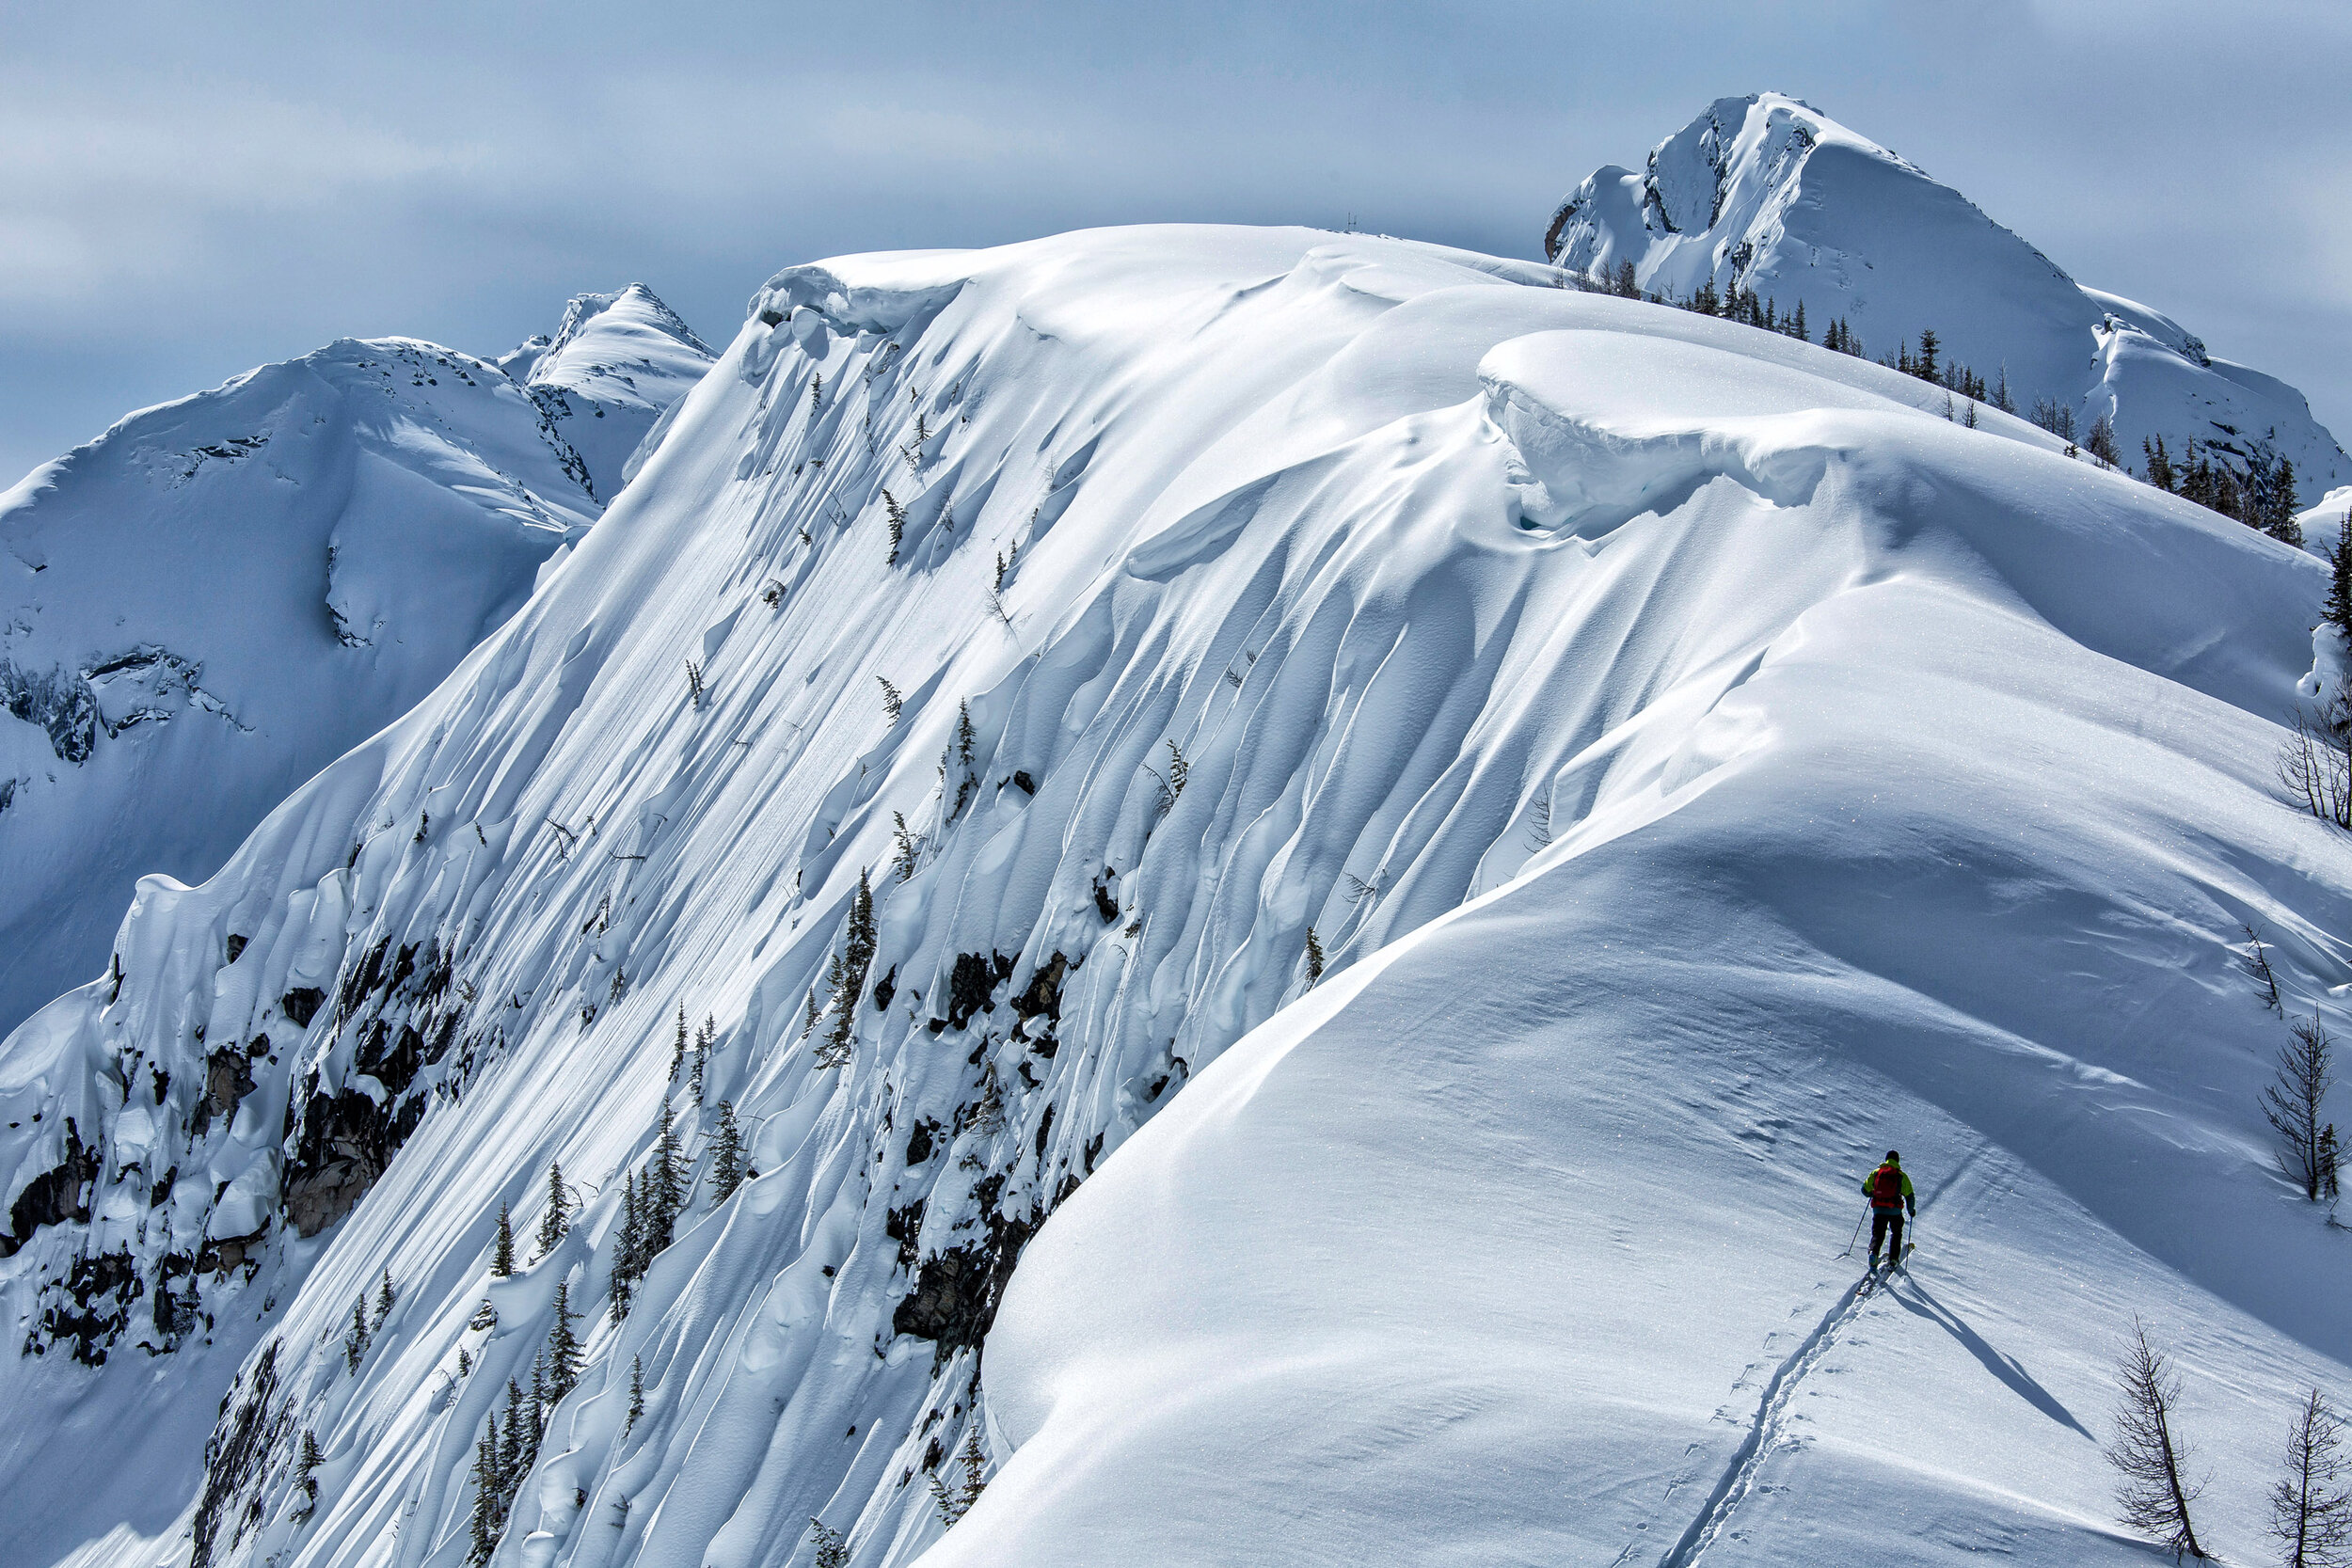  Adventure: Scott Emery backcountry ski touring in the Purcell Mountains, Powder Creek, British Columbia, Canada, Shot for Osprey 